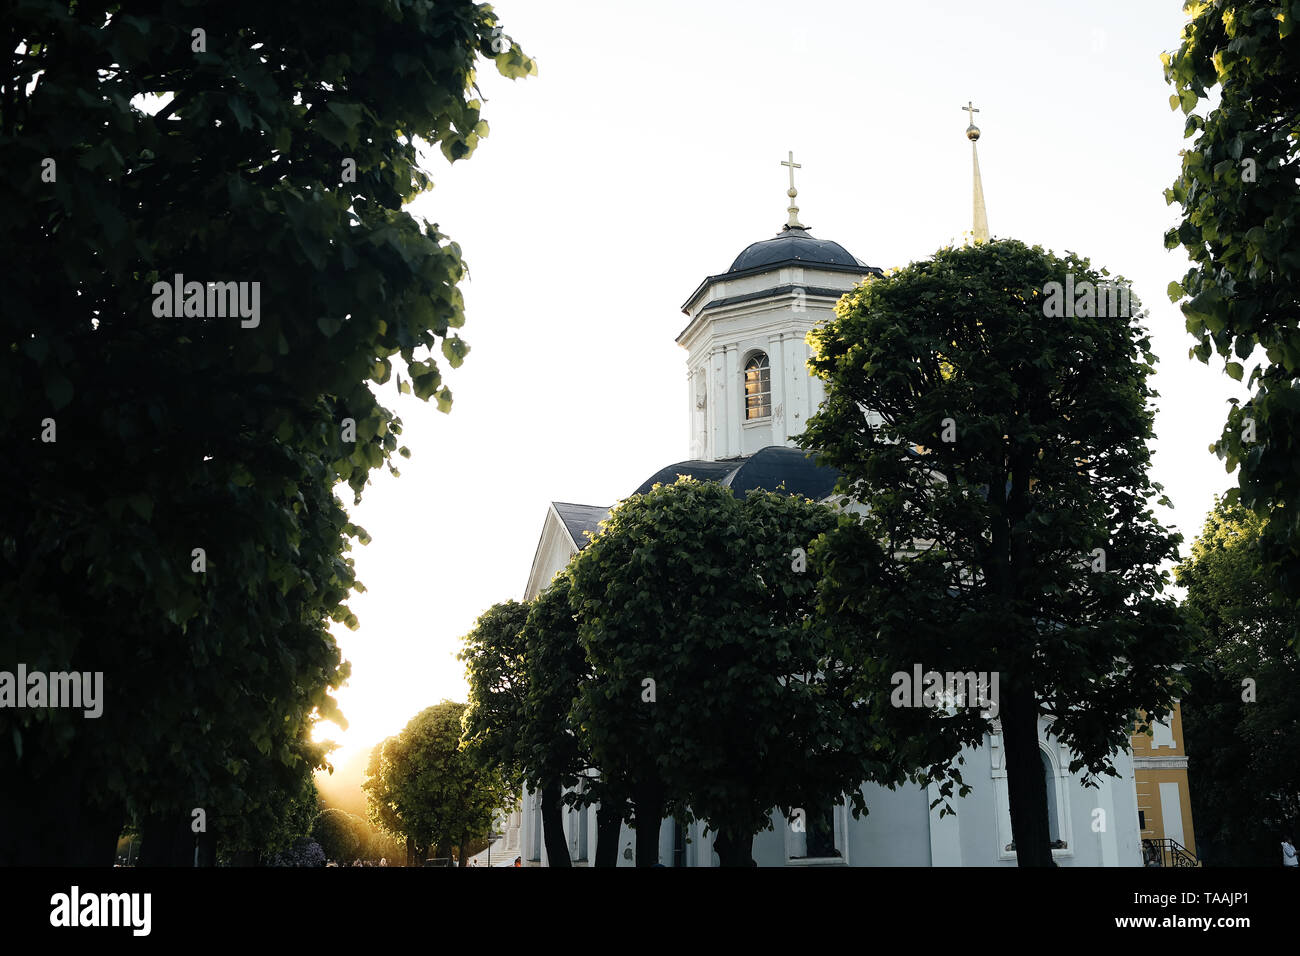 Small russian church in park at sunset Stock Photo